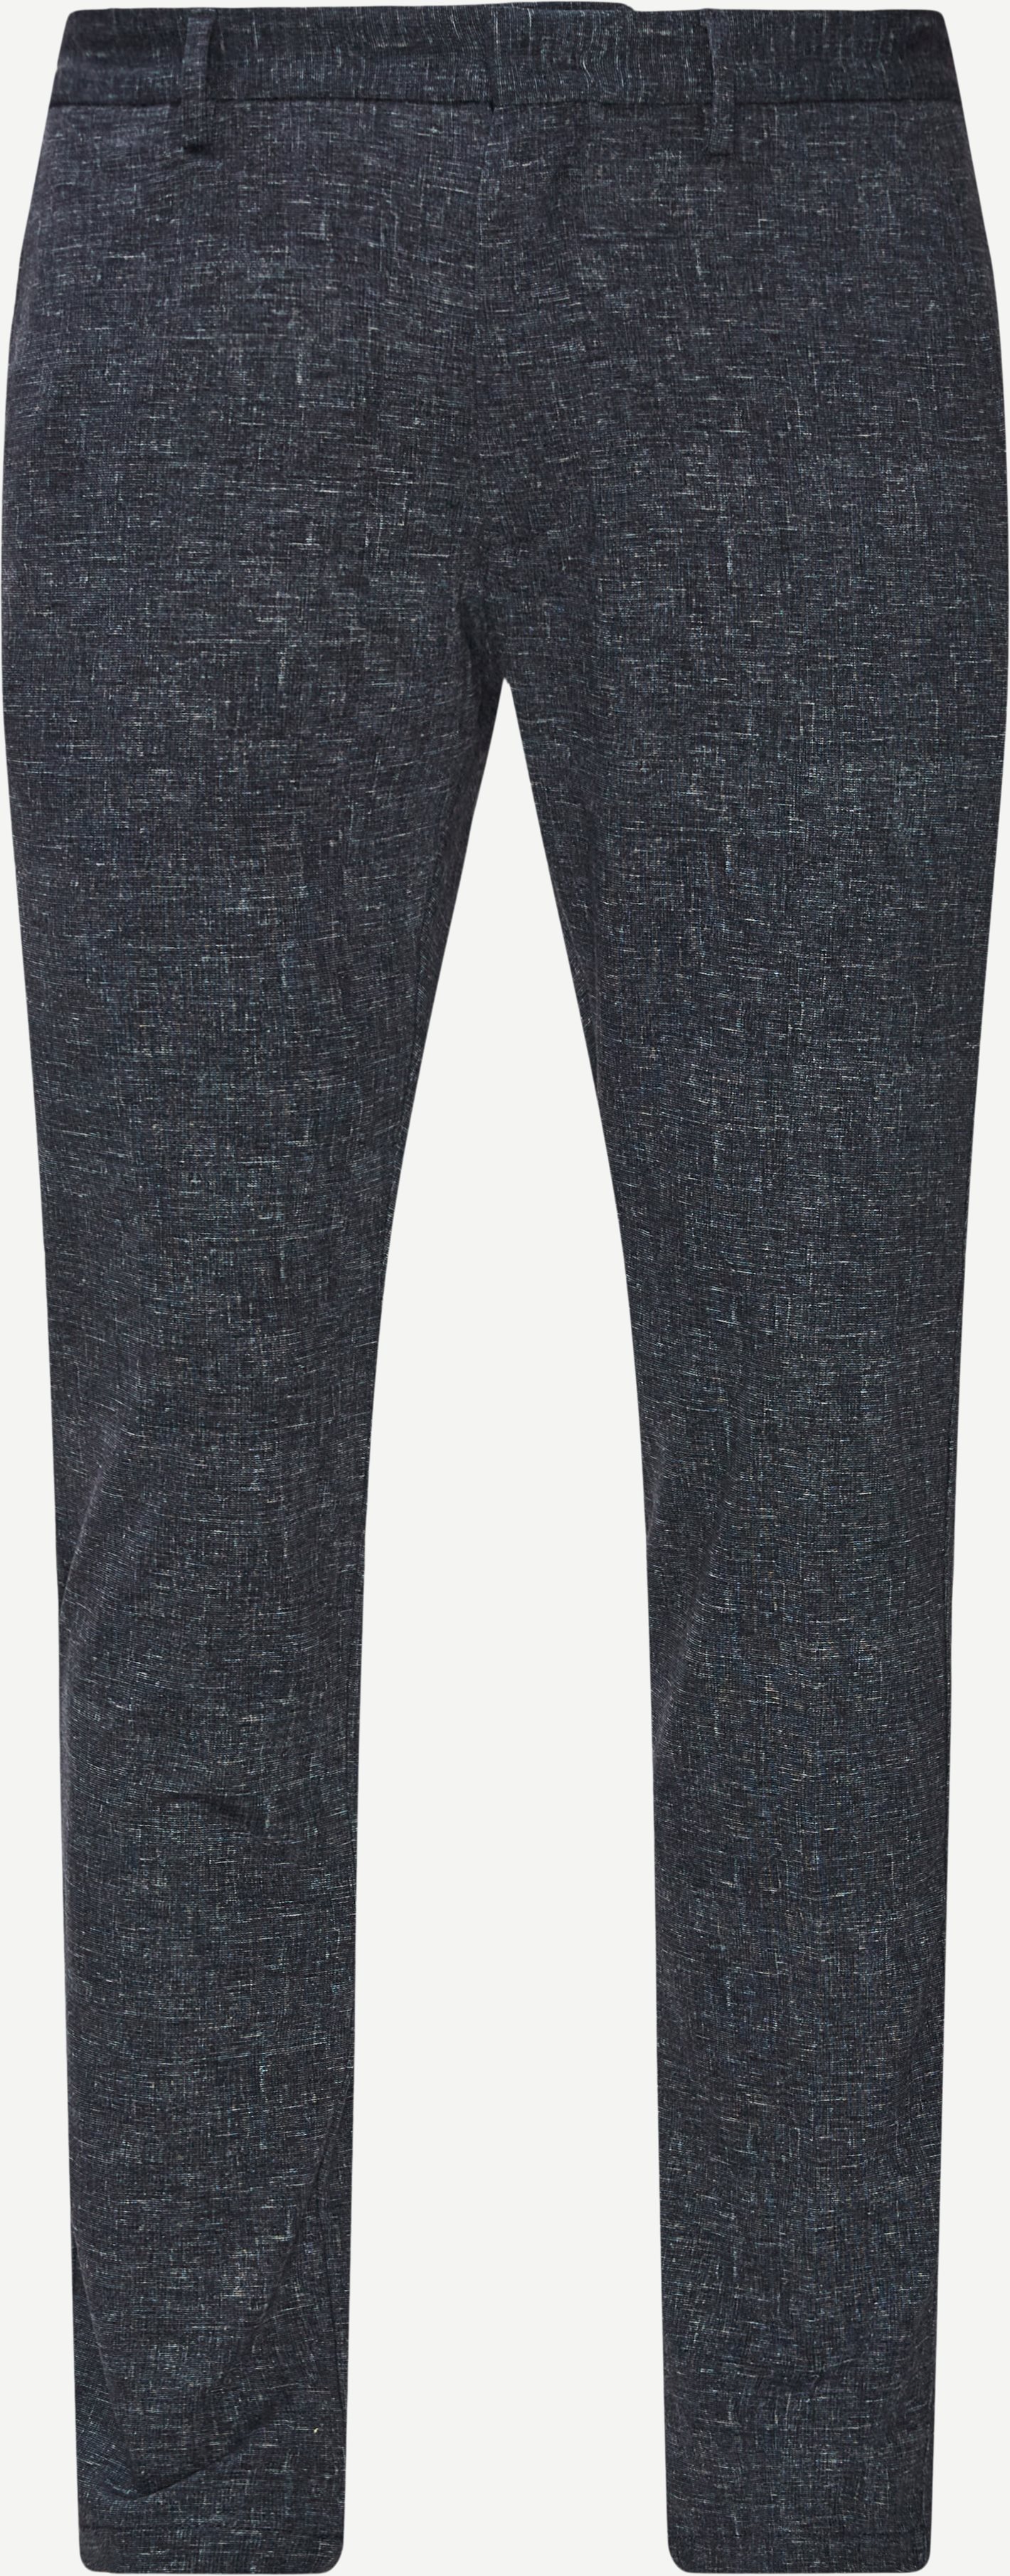 23553 BLEECKER MODERN FKS PANT Trousers NAVY from Tommy Hilfiger 107